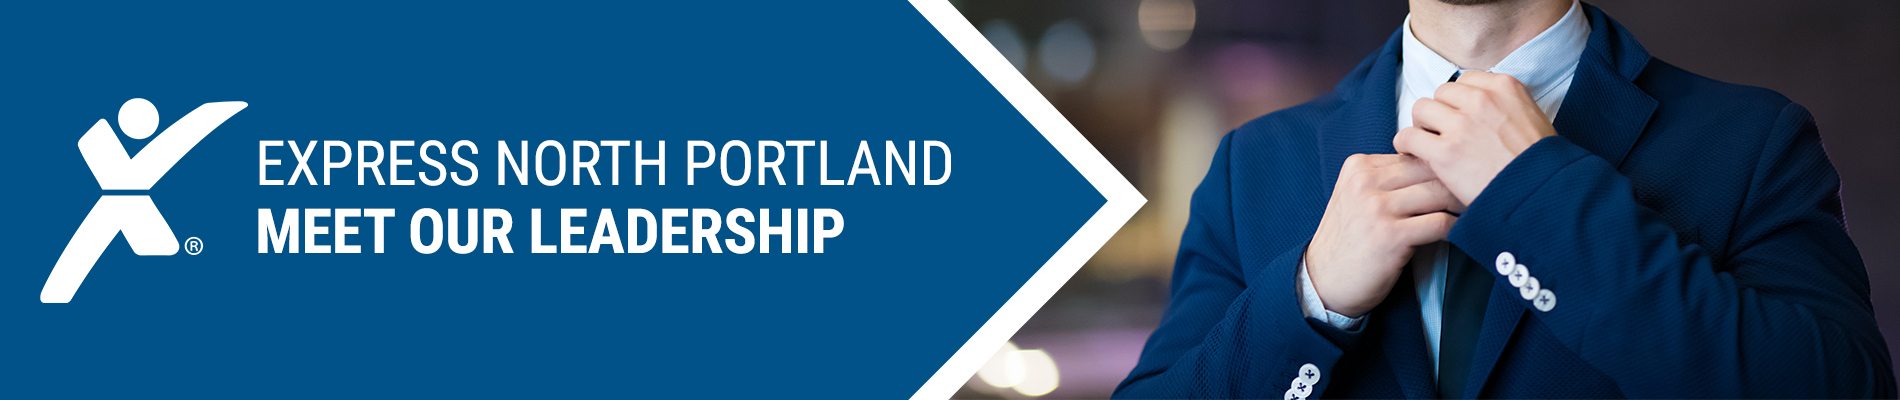 Meet our Leaders - Staffing Providers in North Portland, Oregon